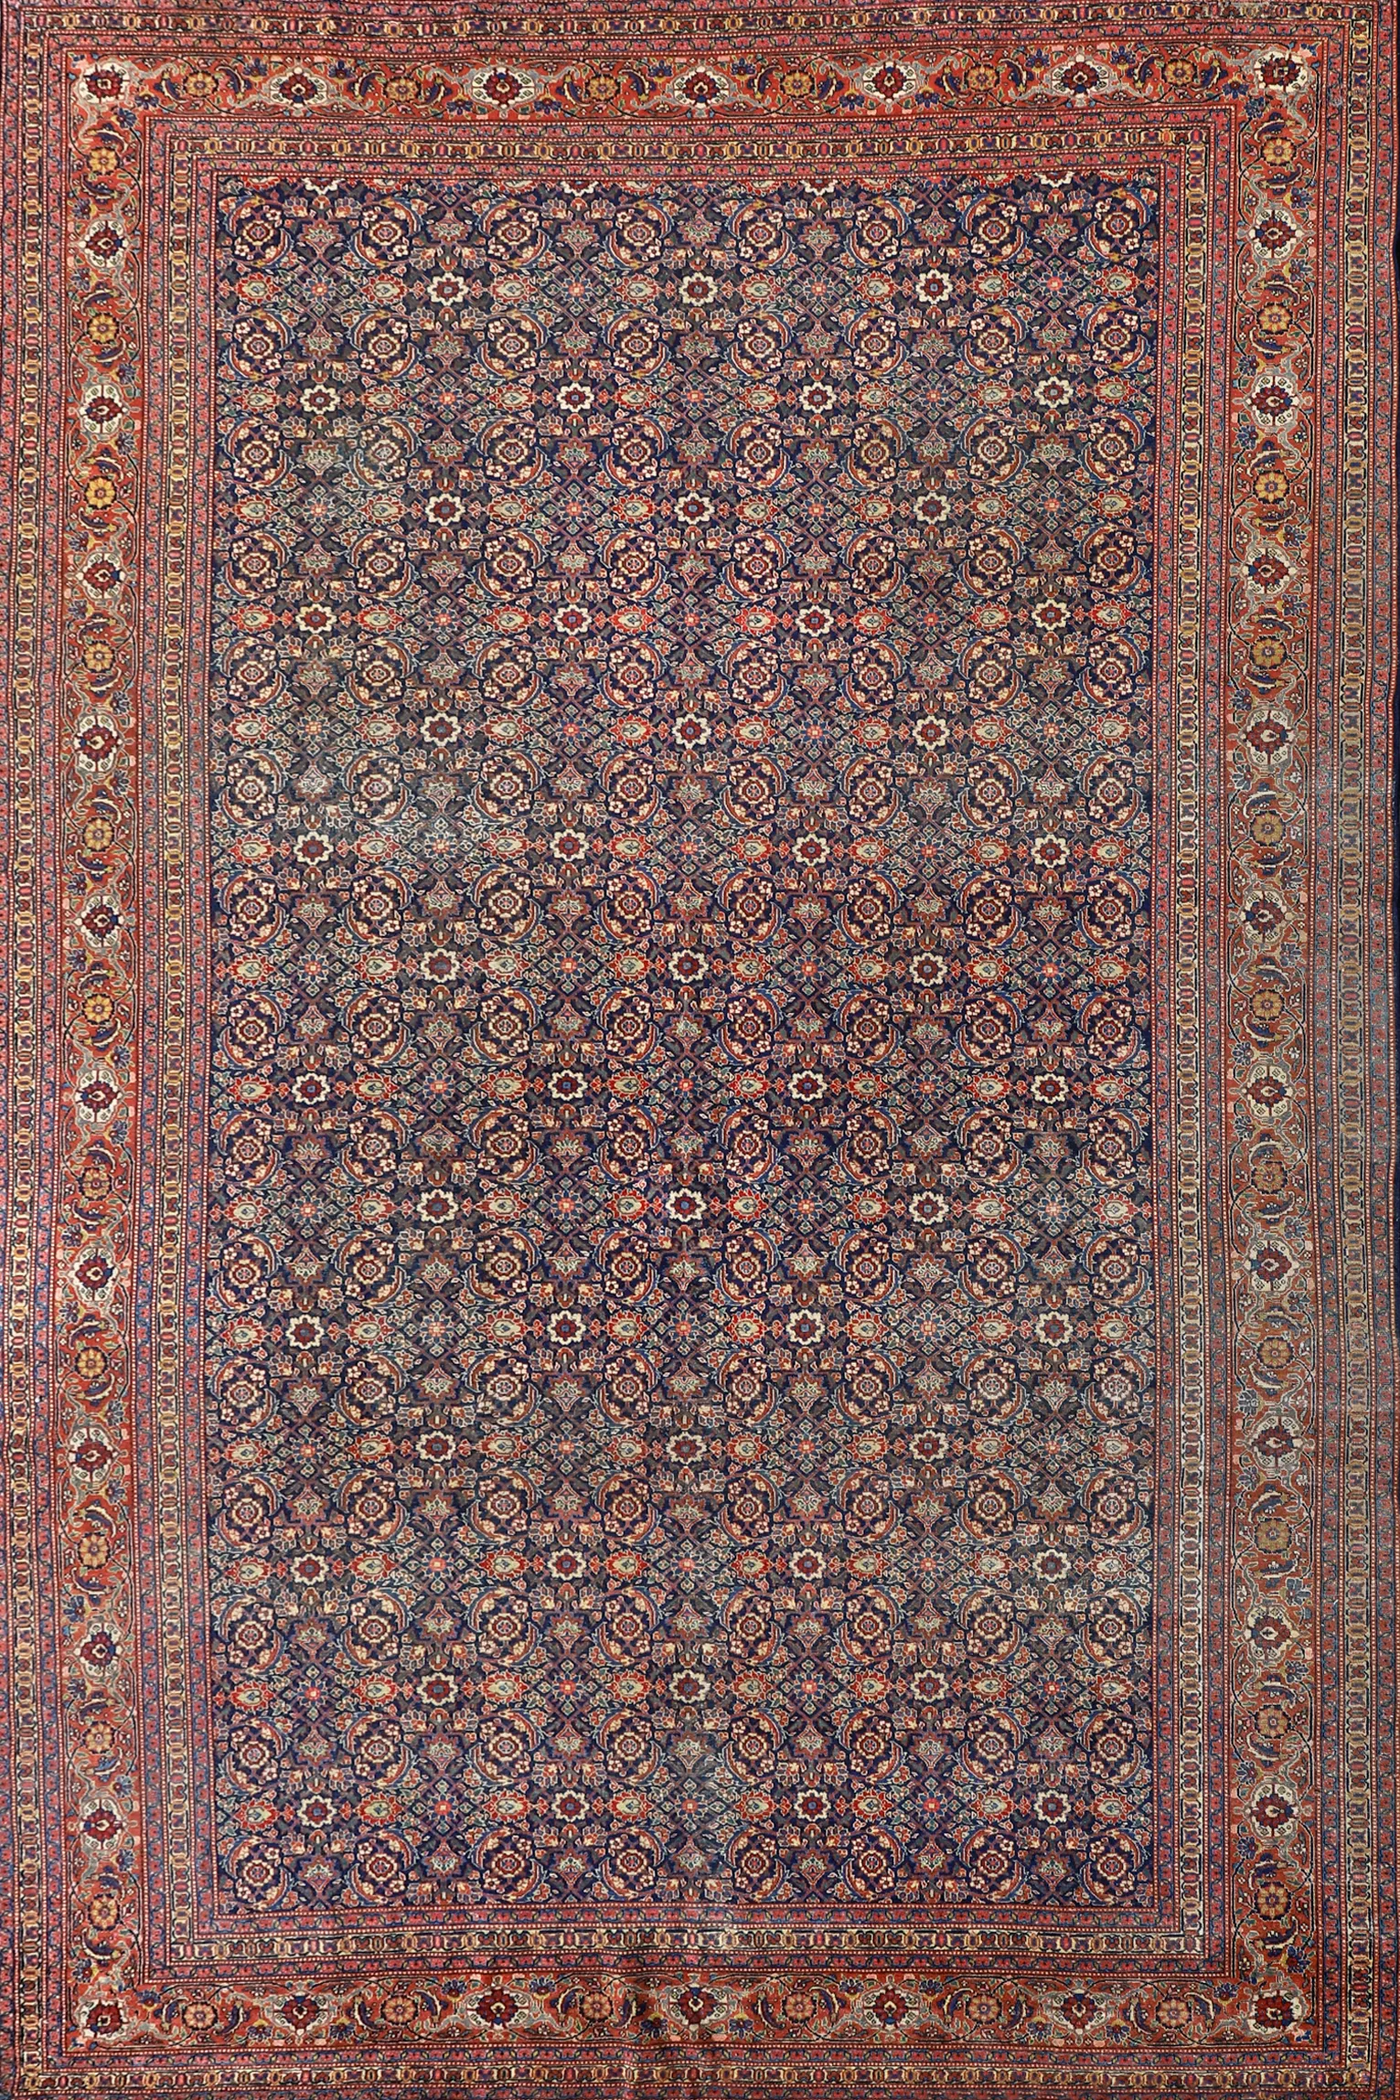 Mashad - Hand-Knotted Wool Rug - 540x357 cm